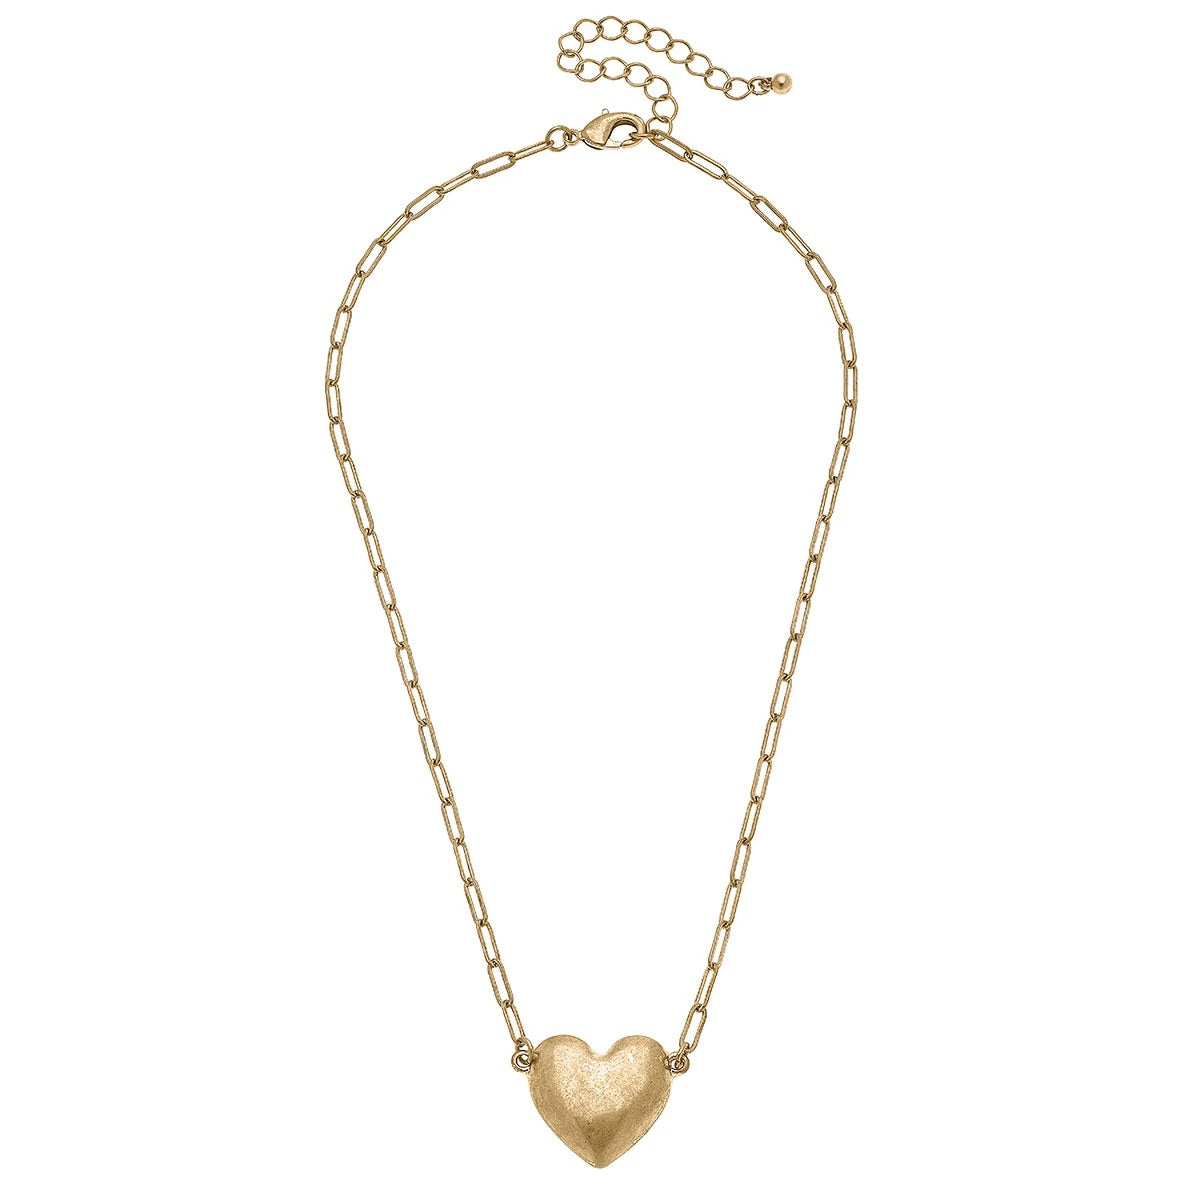 Necklaces- Canvas Shae Puffed Heart Paperclip Chain Necklace in Worn Gold